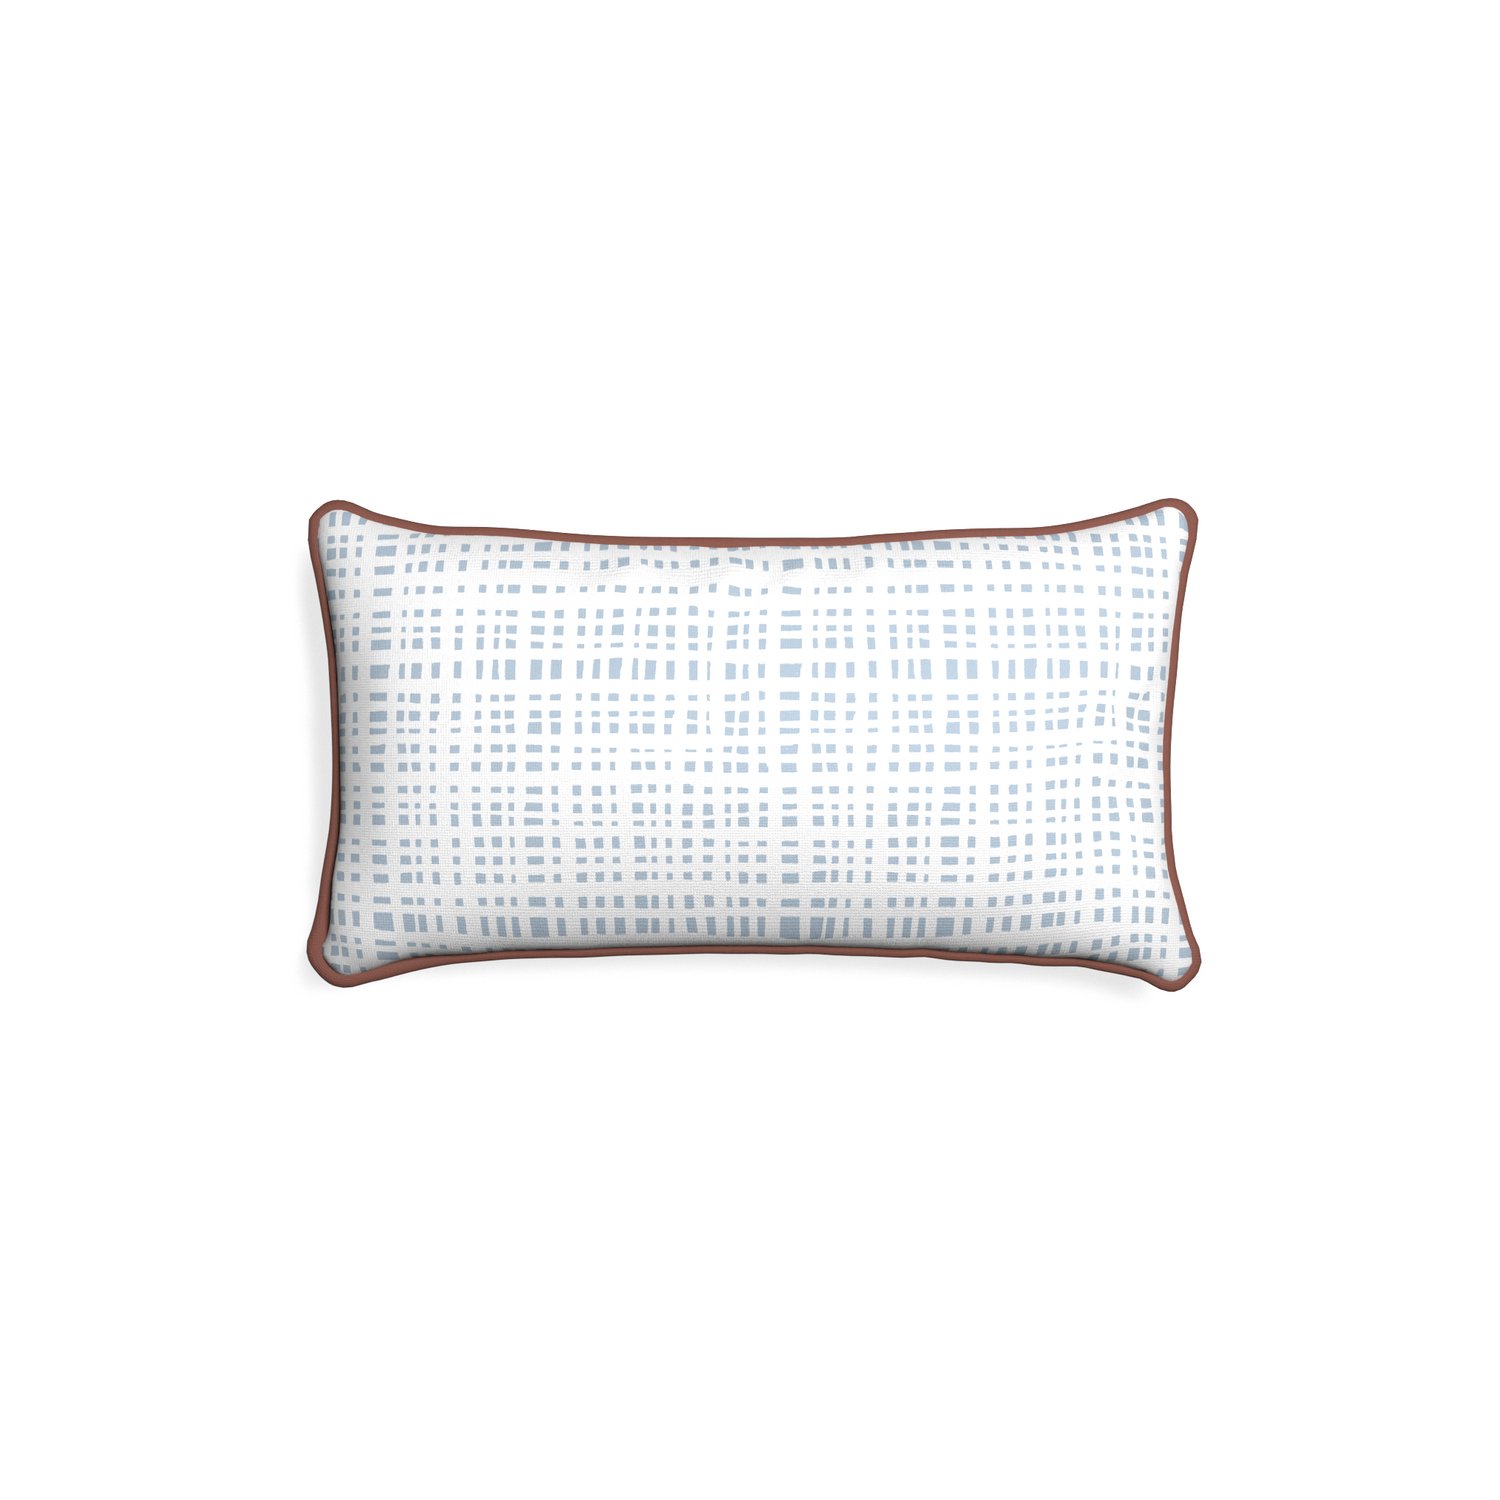 Petite-lumbar ginger sky custom plaid sky bluepillow with w piping on white background